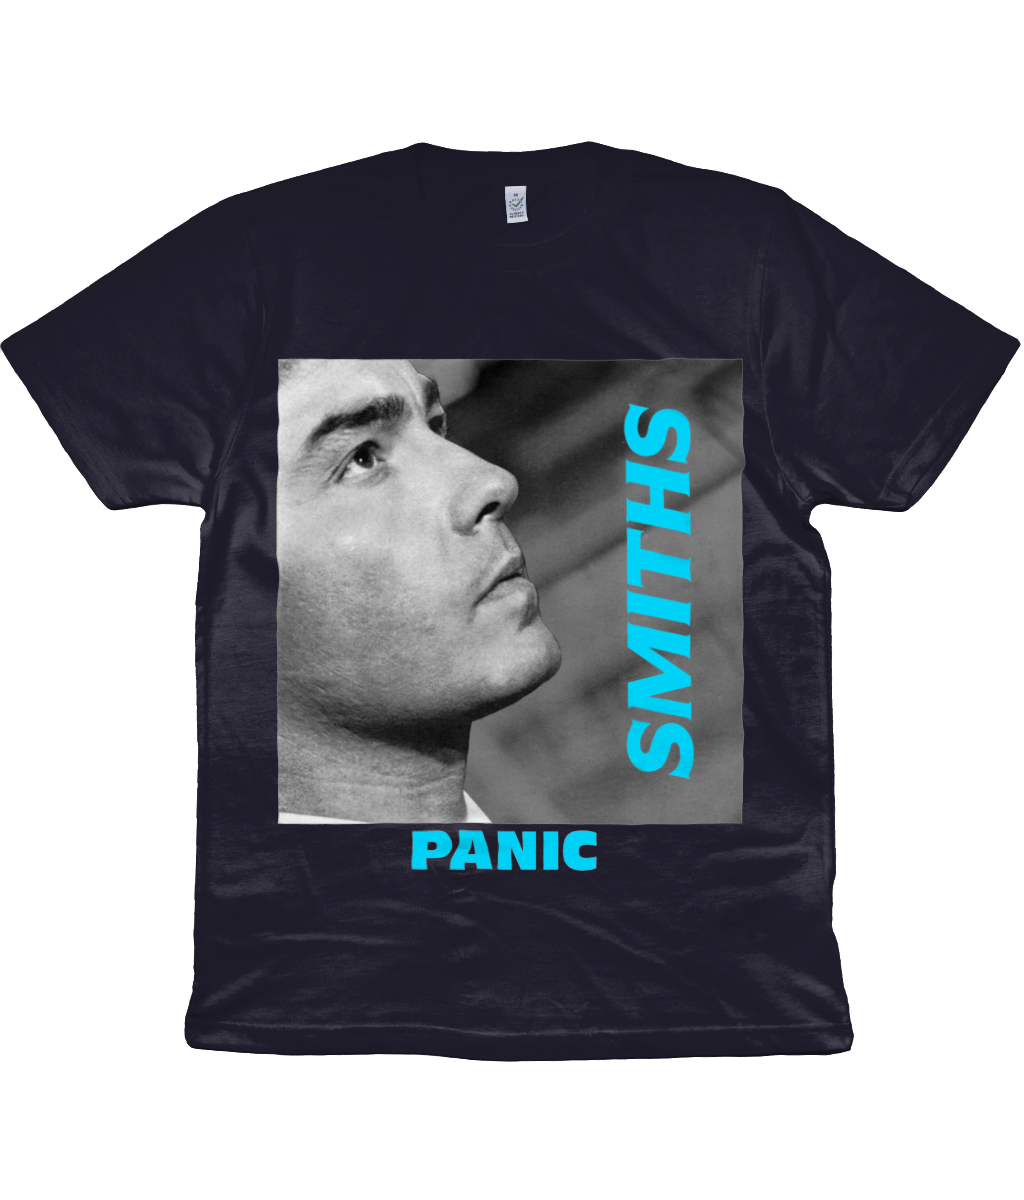 THE SMITHS - PANIC - 1986 - COULD LIFE EVER BE SANE AGAIN?